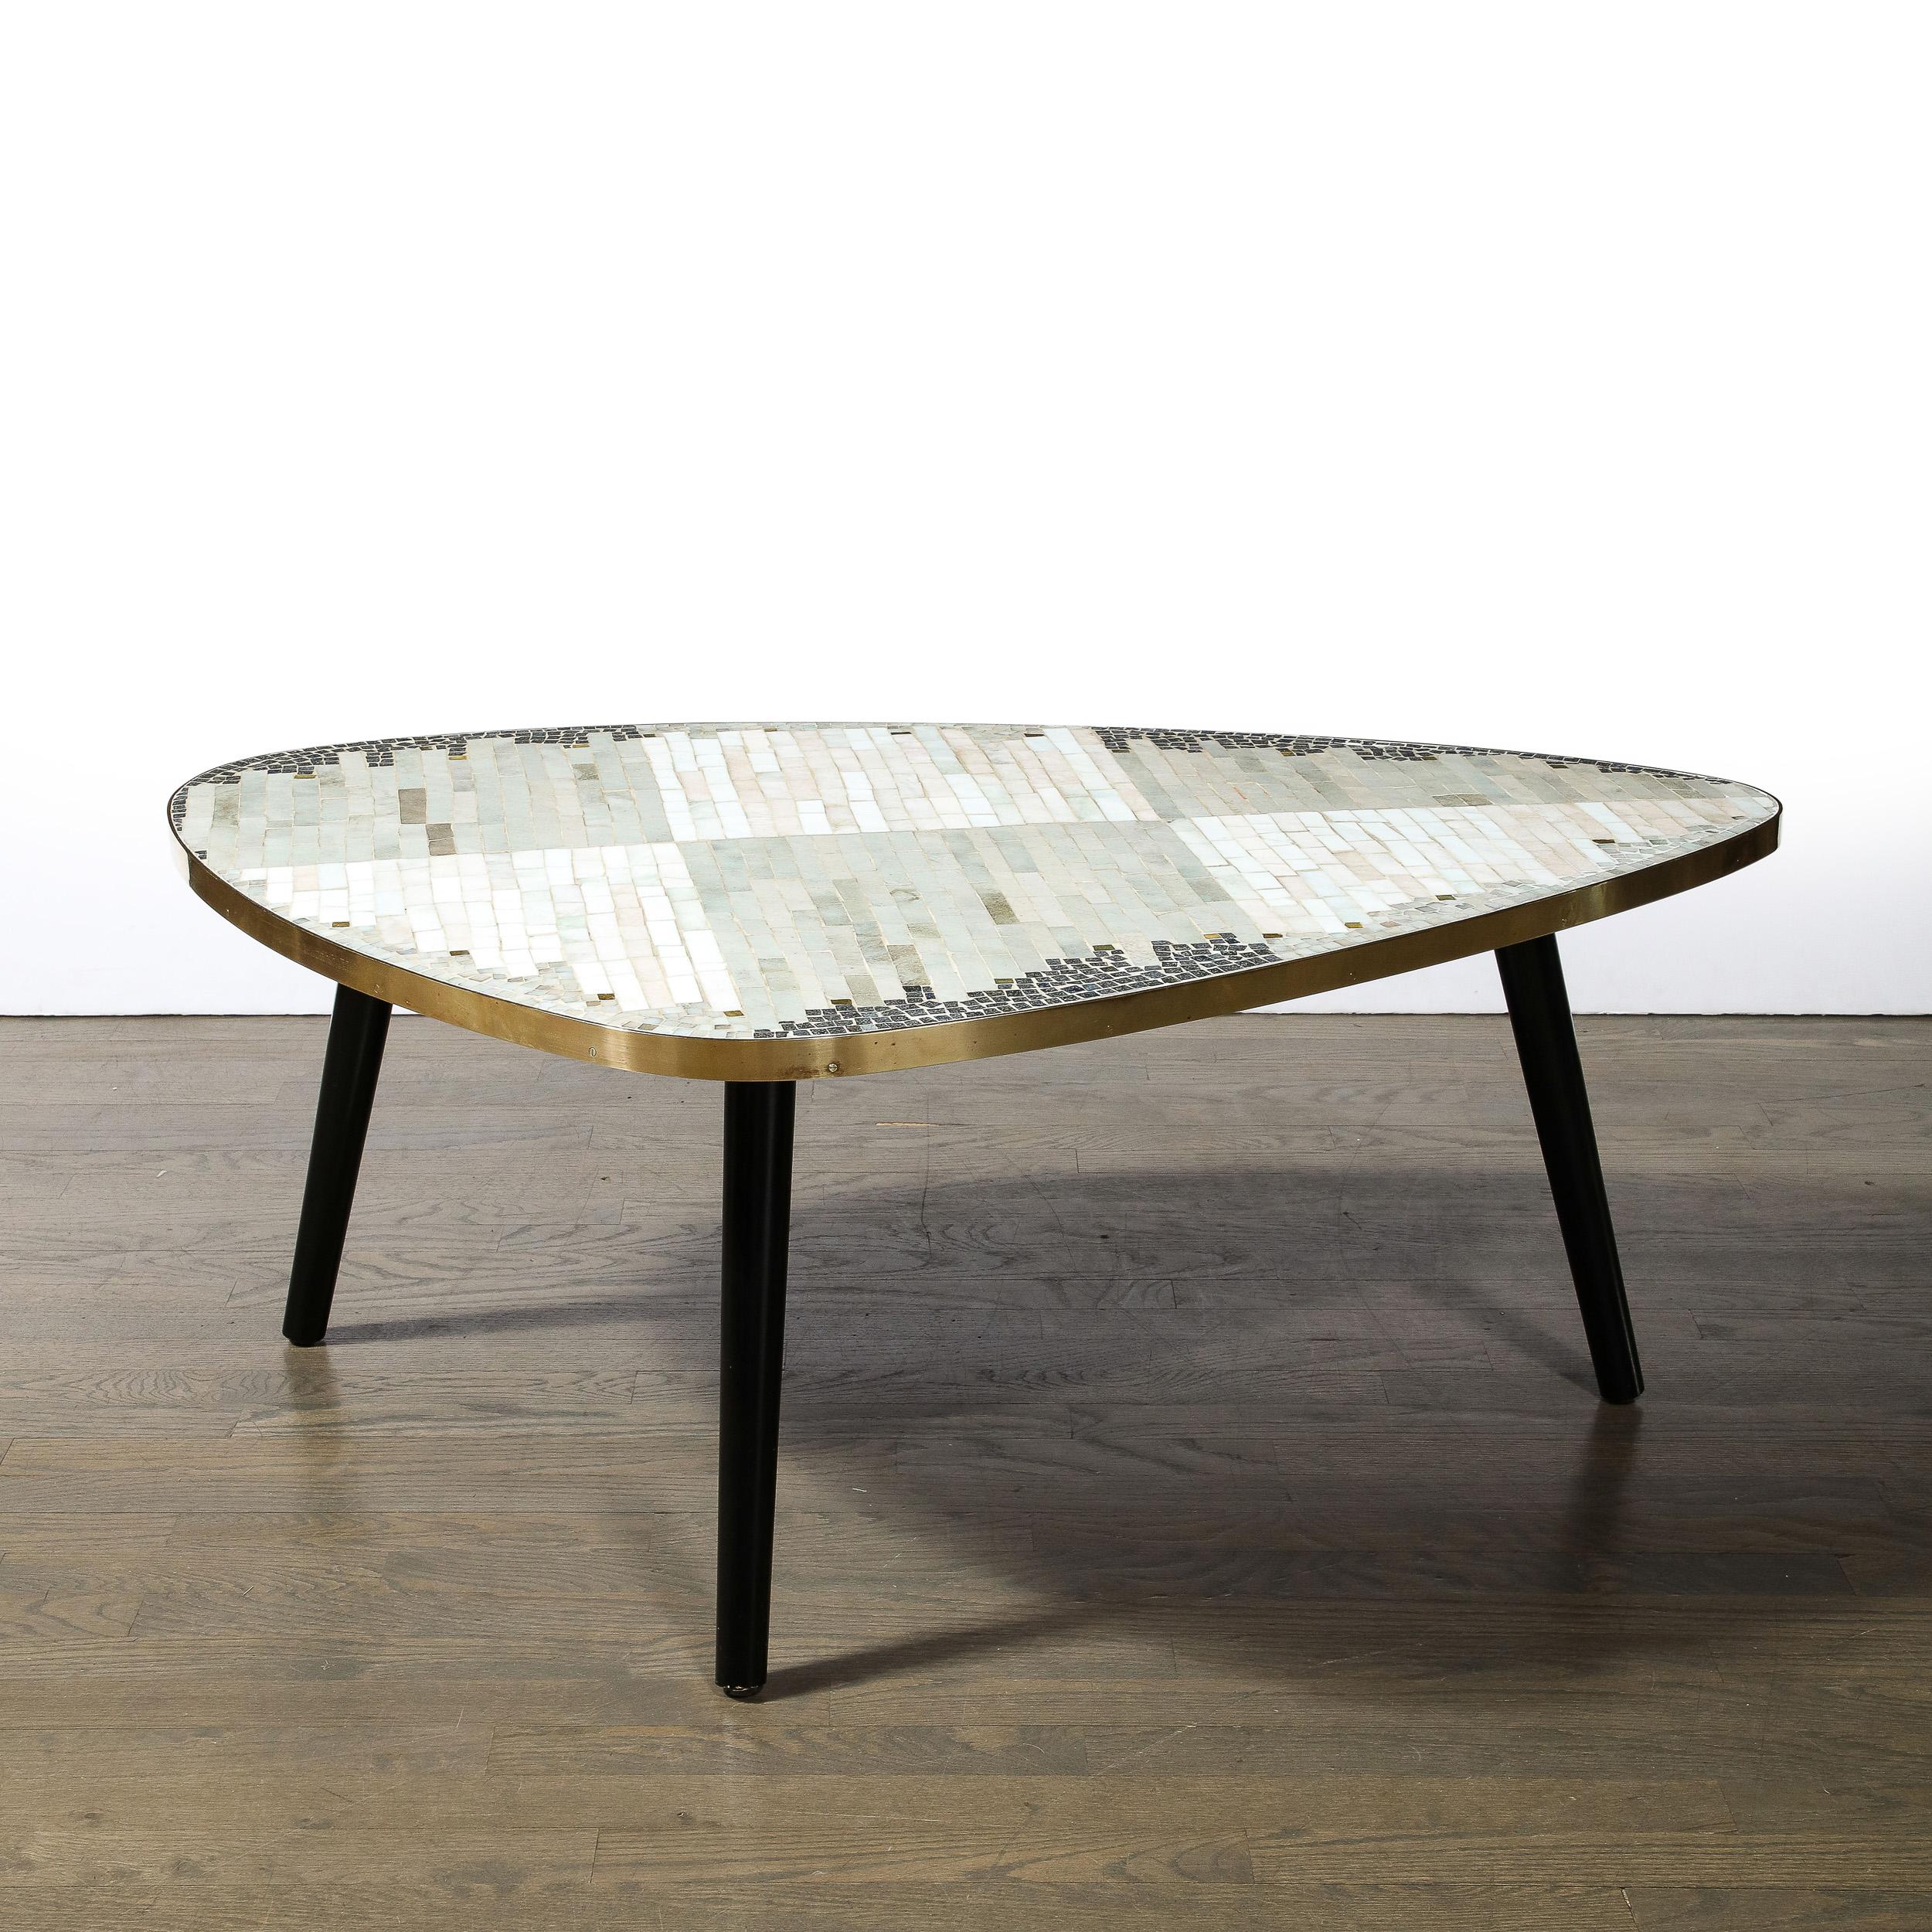 This beautiful Mid-Century Modern cocktail table was realized in France circa 1960. It features a vaguely triangular amorphic form with rounded corners. The perimeter of the piece is wrapped in brass while the interior of the top offers a fantastic